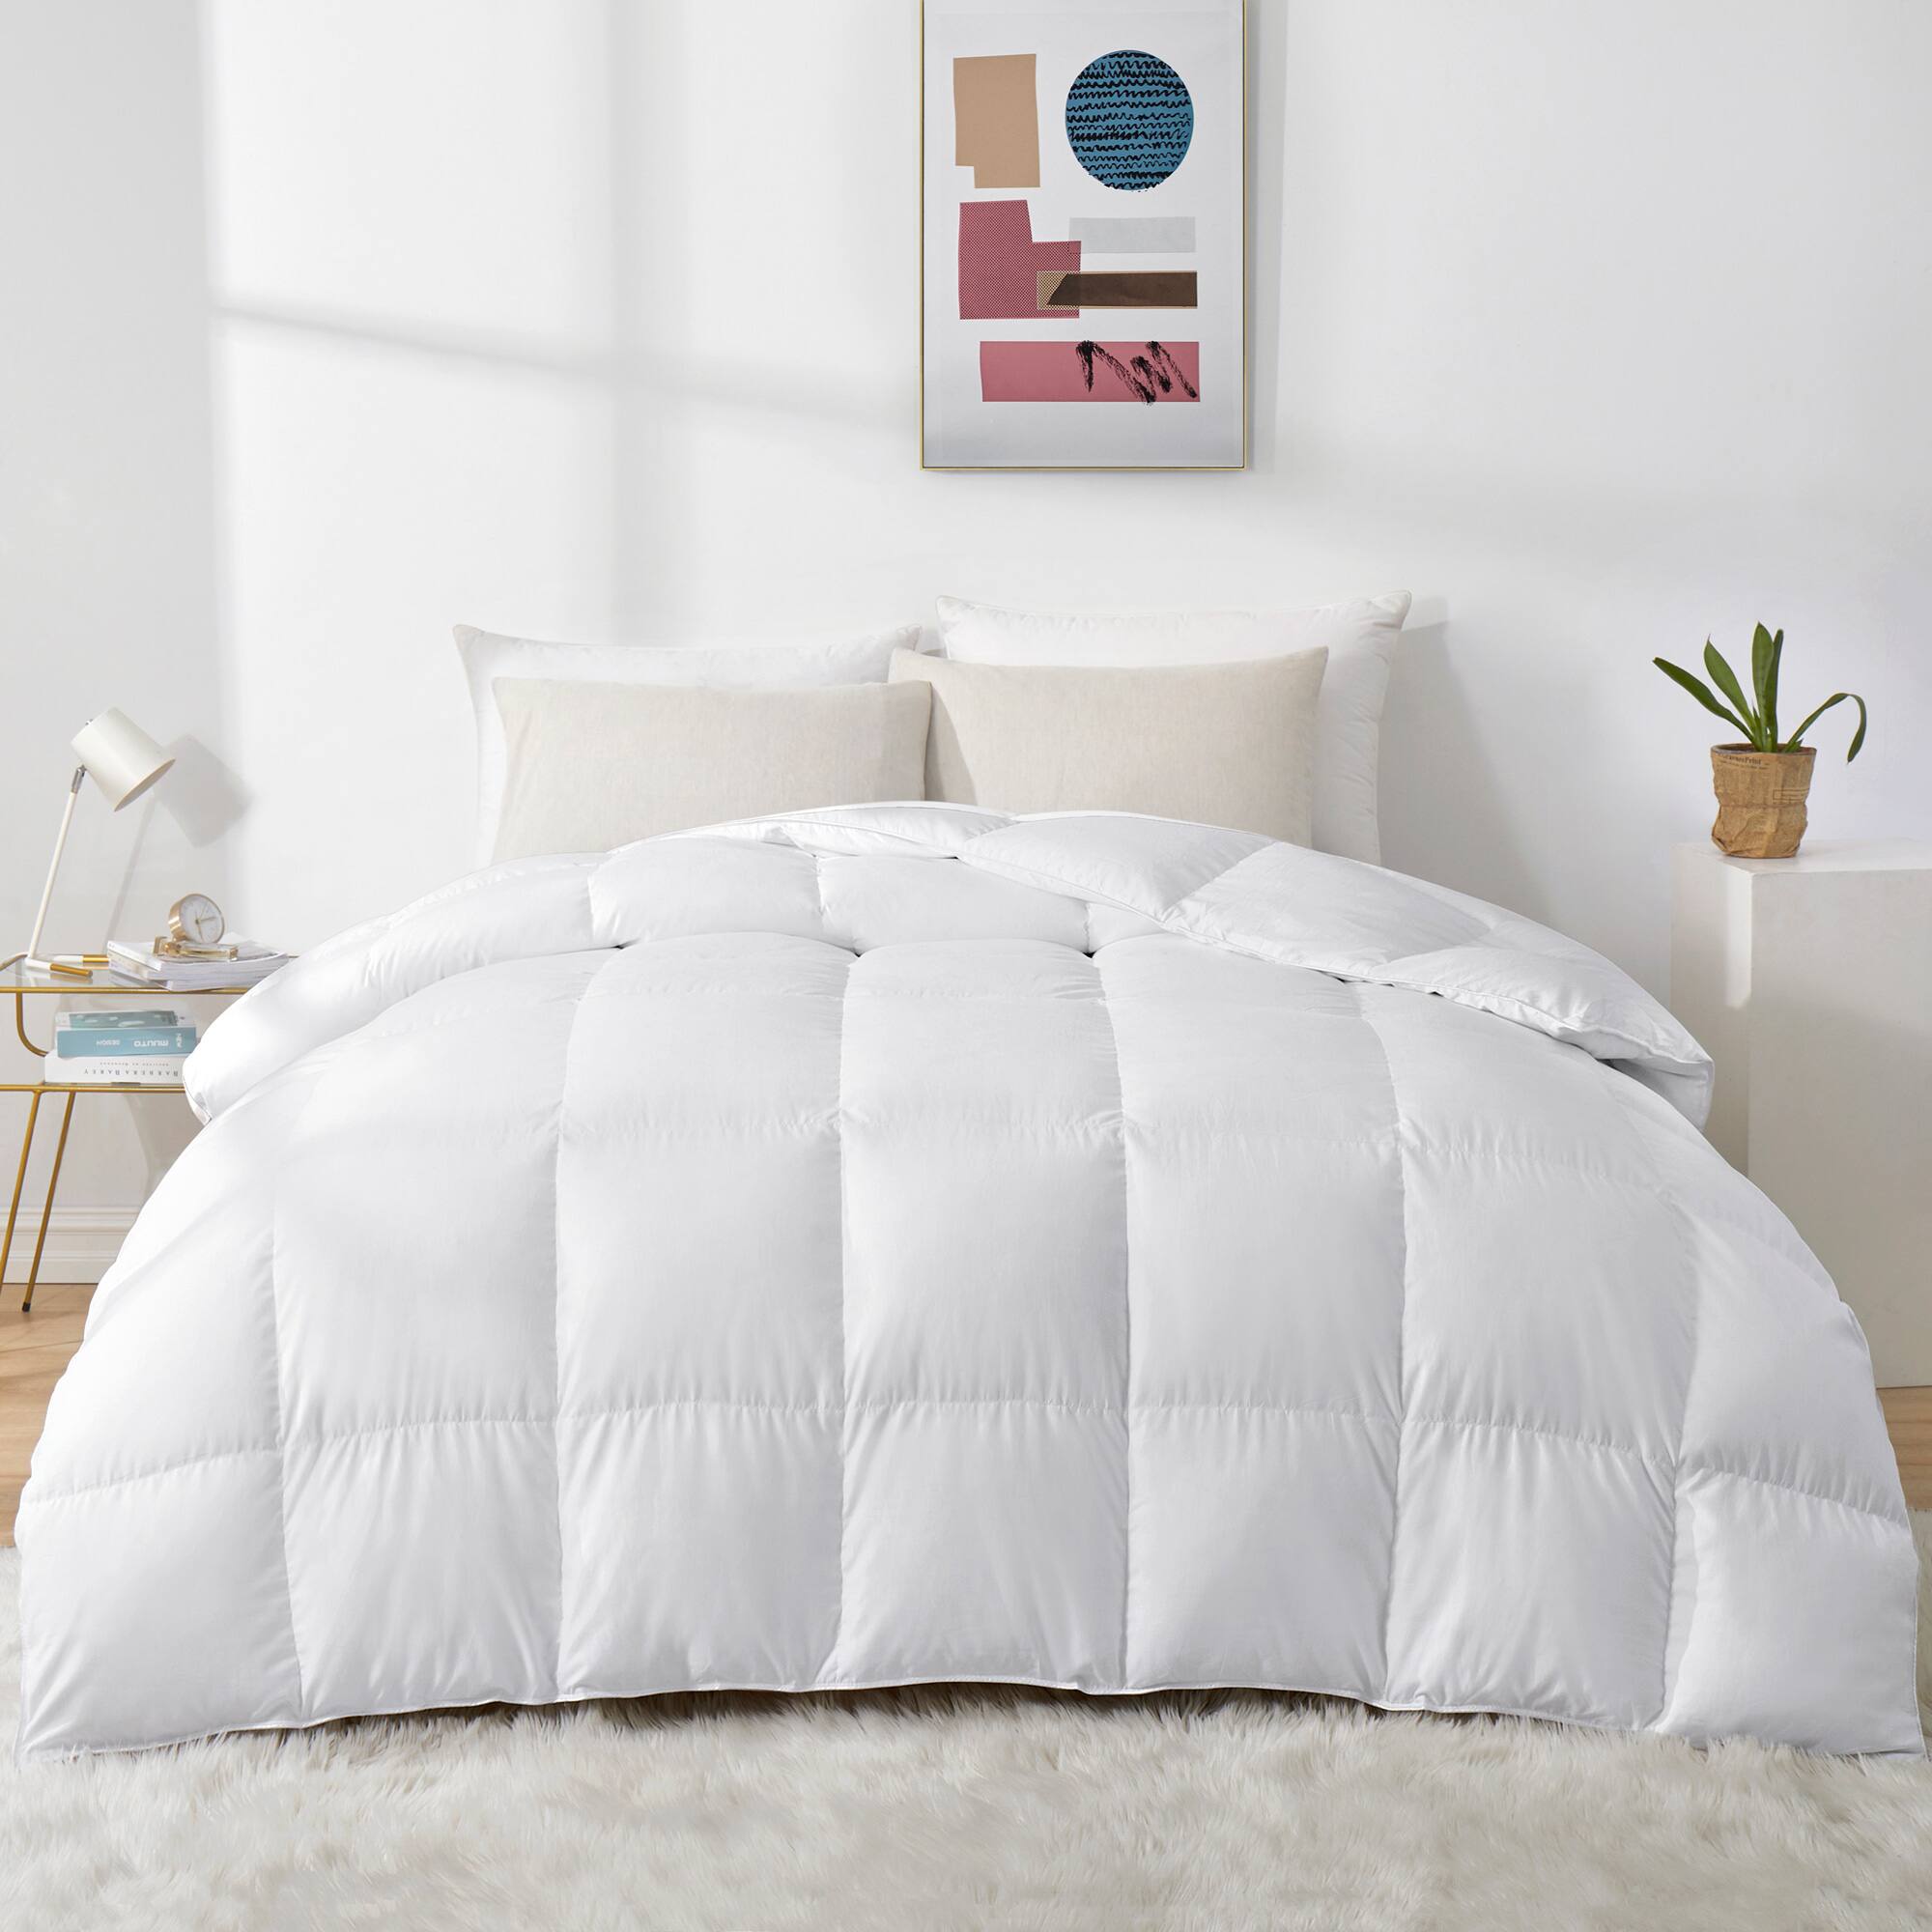 Black Friday Sale: Get 25% OFF on Extra Warmth Down Comforter for Winter Soft and Wrinkle-resistant Fabric 360 TC, Twin $127.5, Full/Queen $150, King $172.5 + Free Shipping